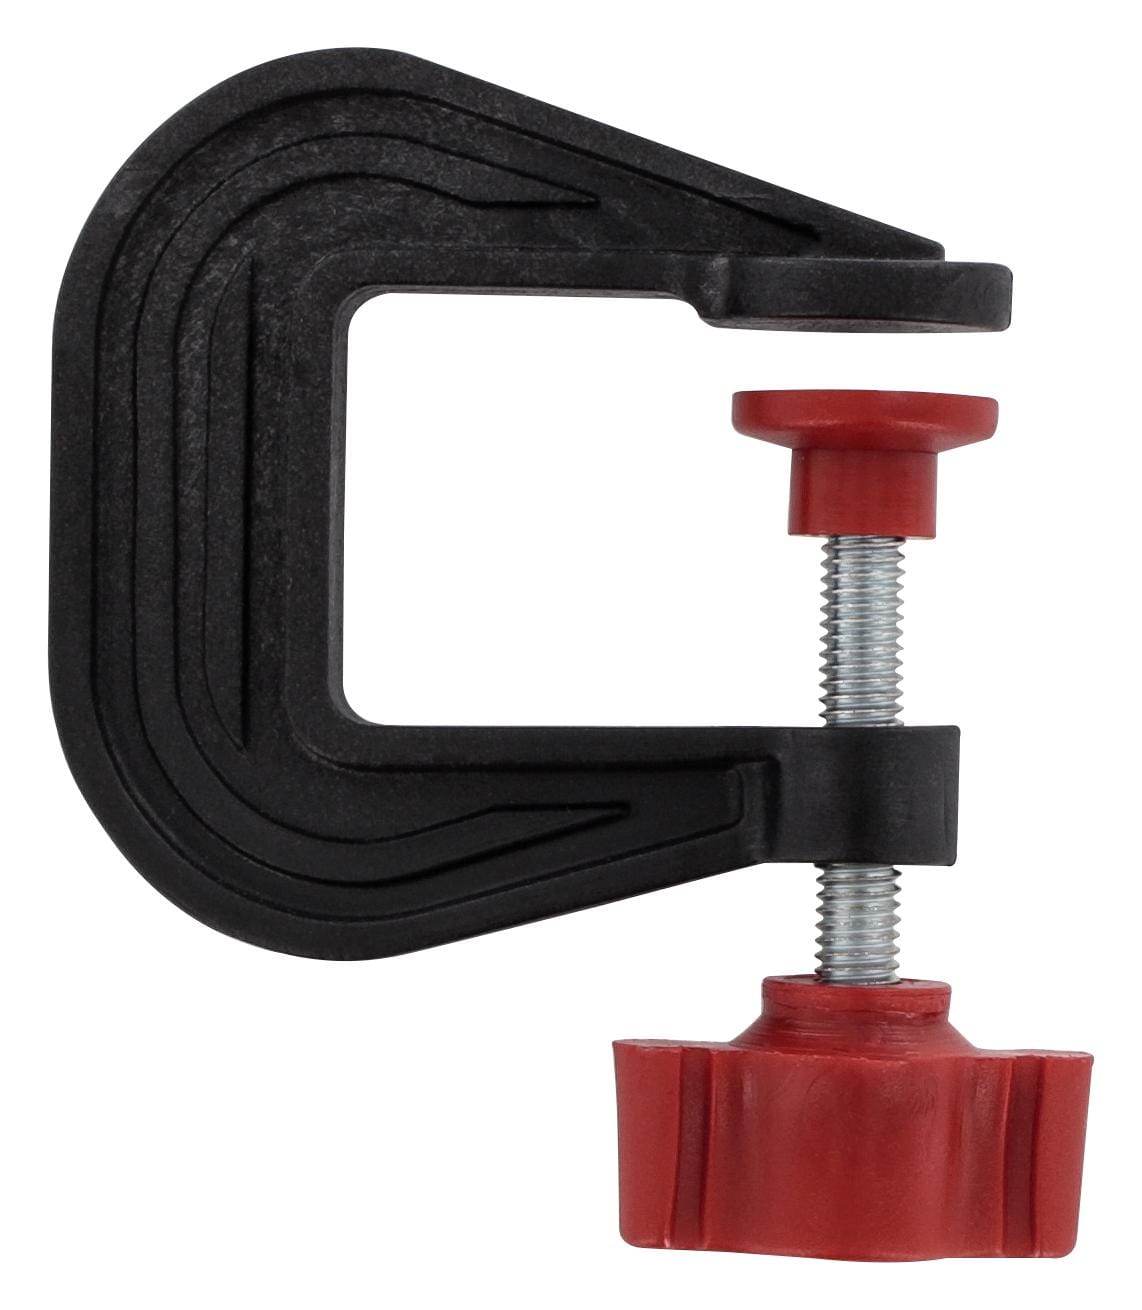 MODELCRAFT G Clamp PCL3025 G CLAMP, PLASTIC, 25MM MODELCRAFT 2915113 PCL3025